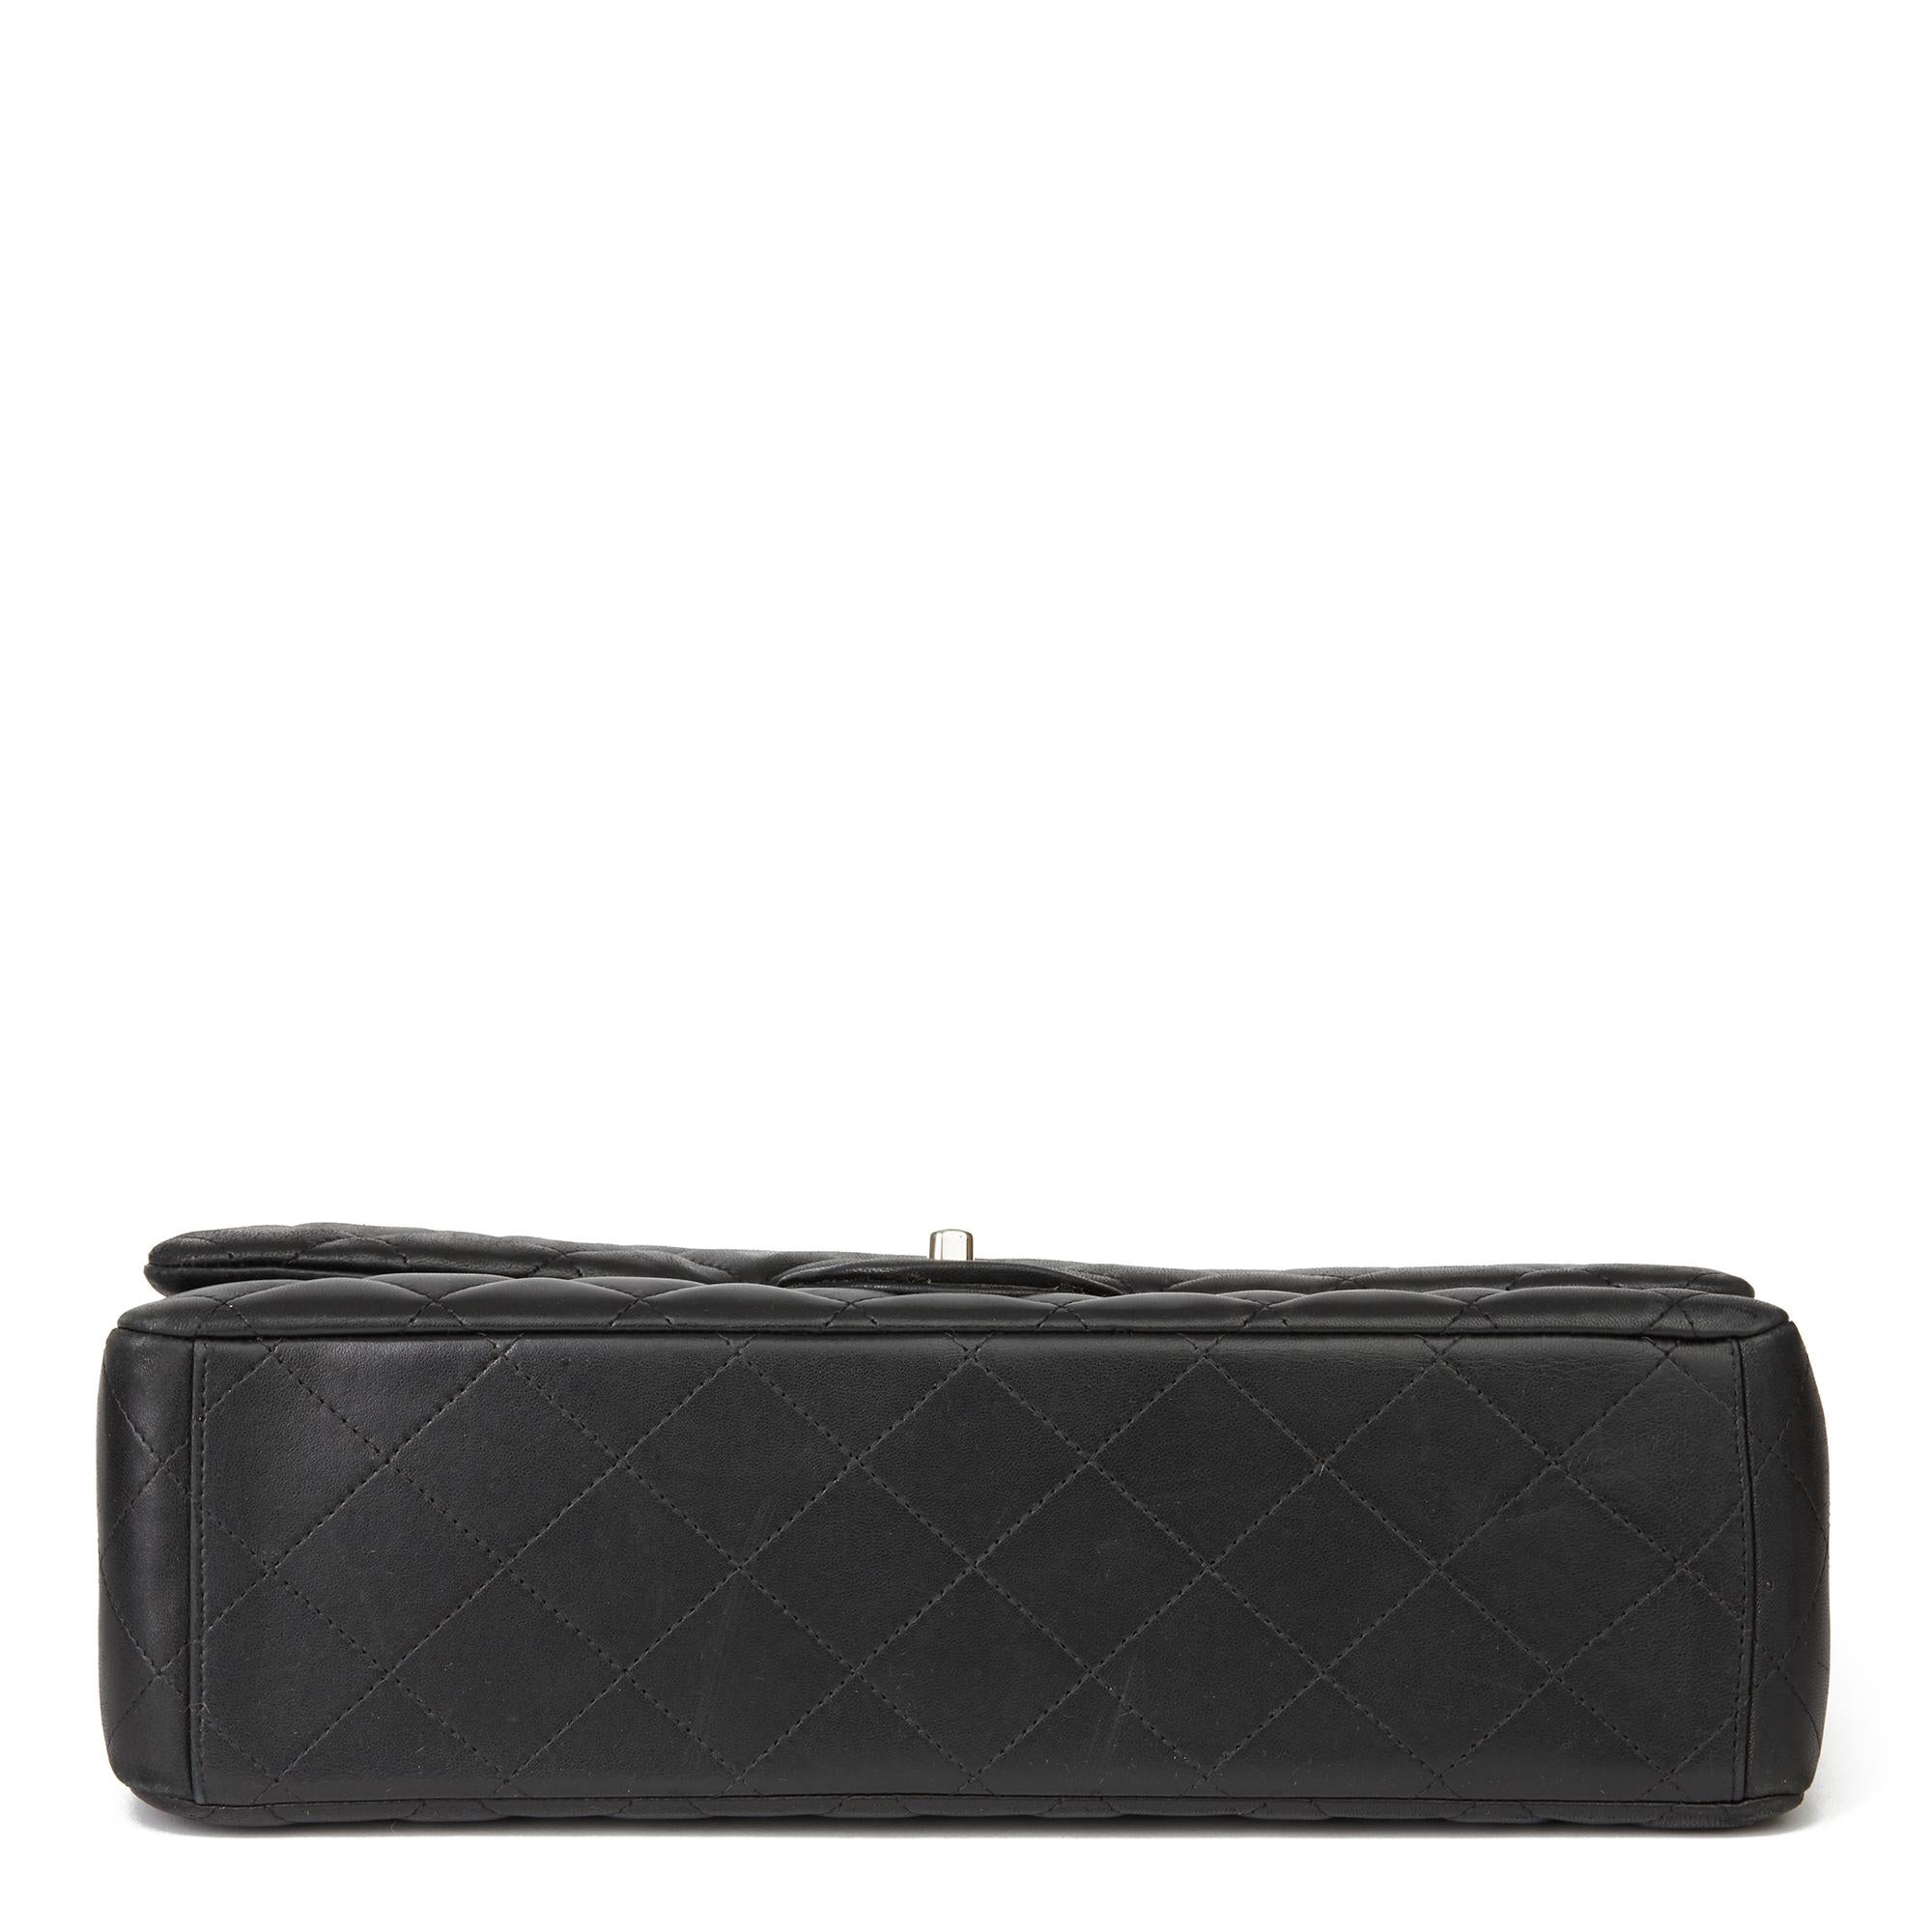 2012 Chanel Black Quilted Lambskin Maxi Classic Double Flap Bag 2